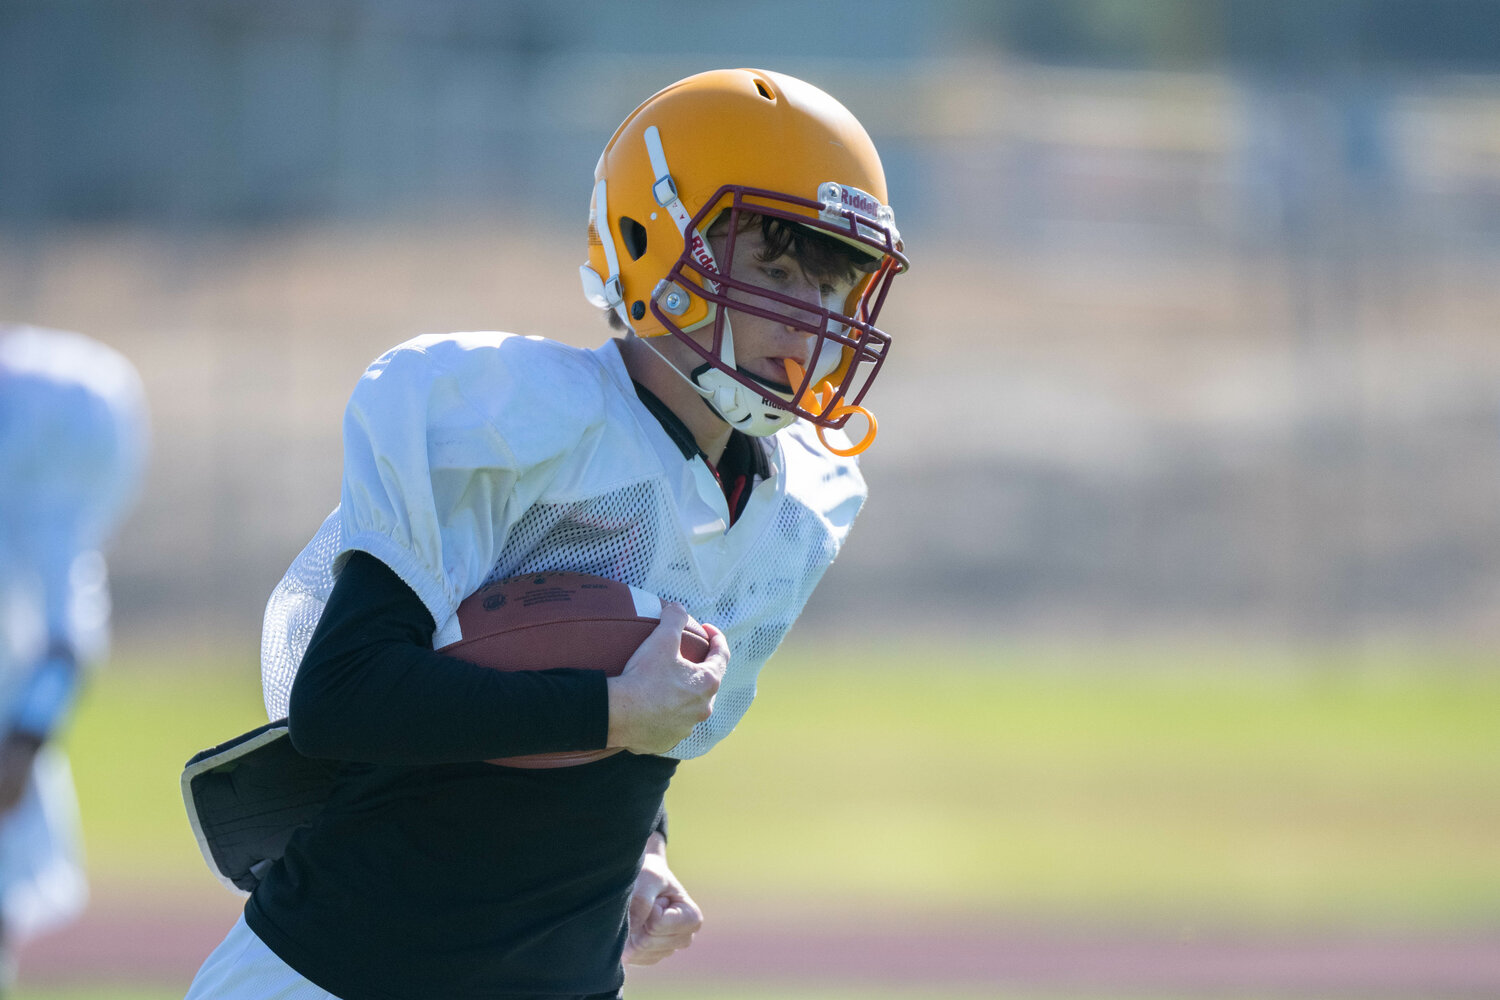 Carter Svenson carries the ball at Winlock's practice on Aug. 19.